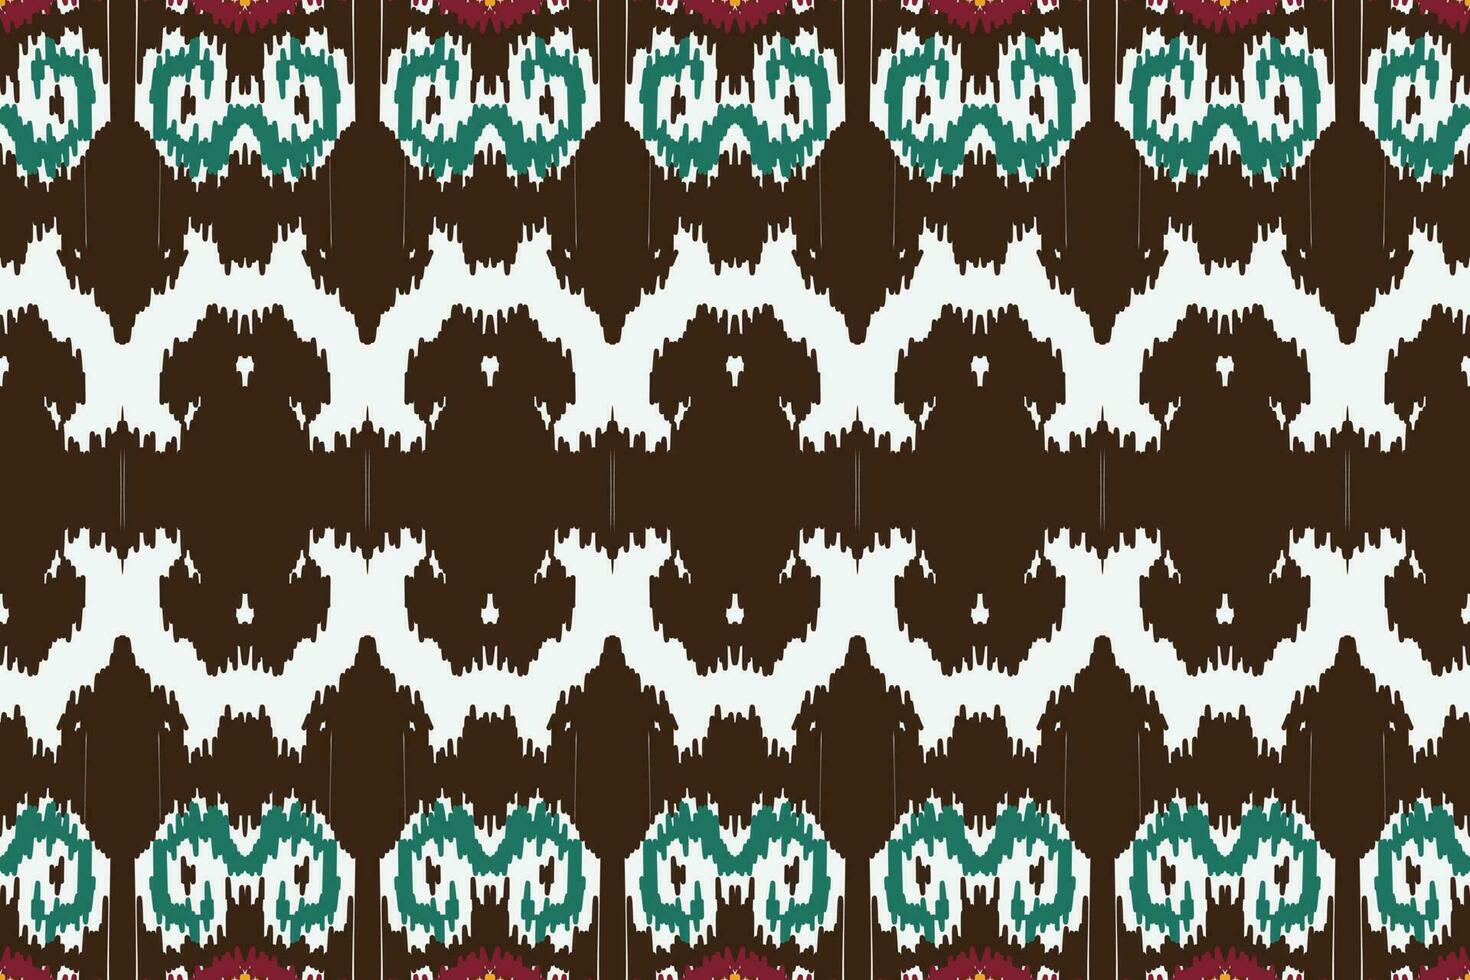 African Ikat fabric paisley embroidery background. geometric ethnic oriental pattern traditional. Ikat Aztec style abstract vector illustration. design for print texture,fabric,saree,sari,carpet.